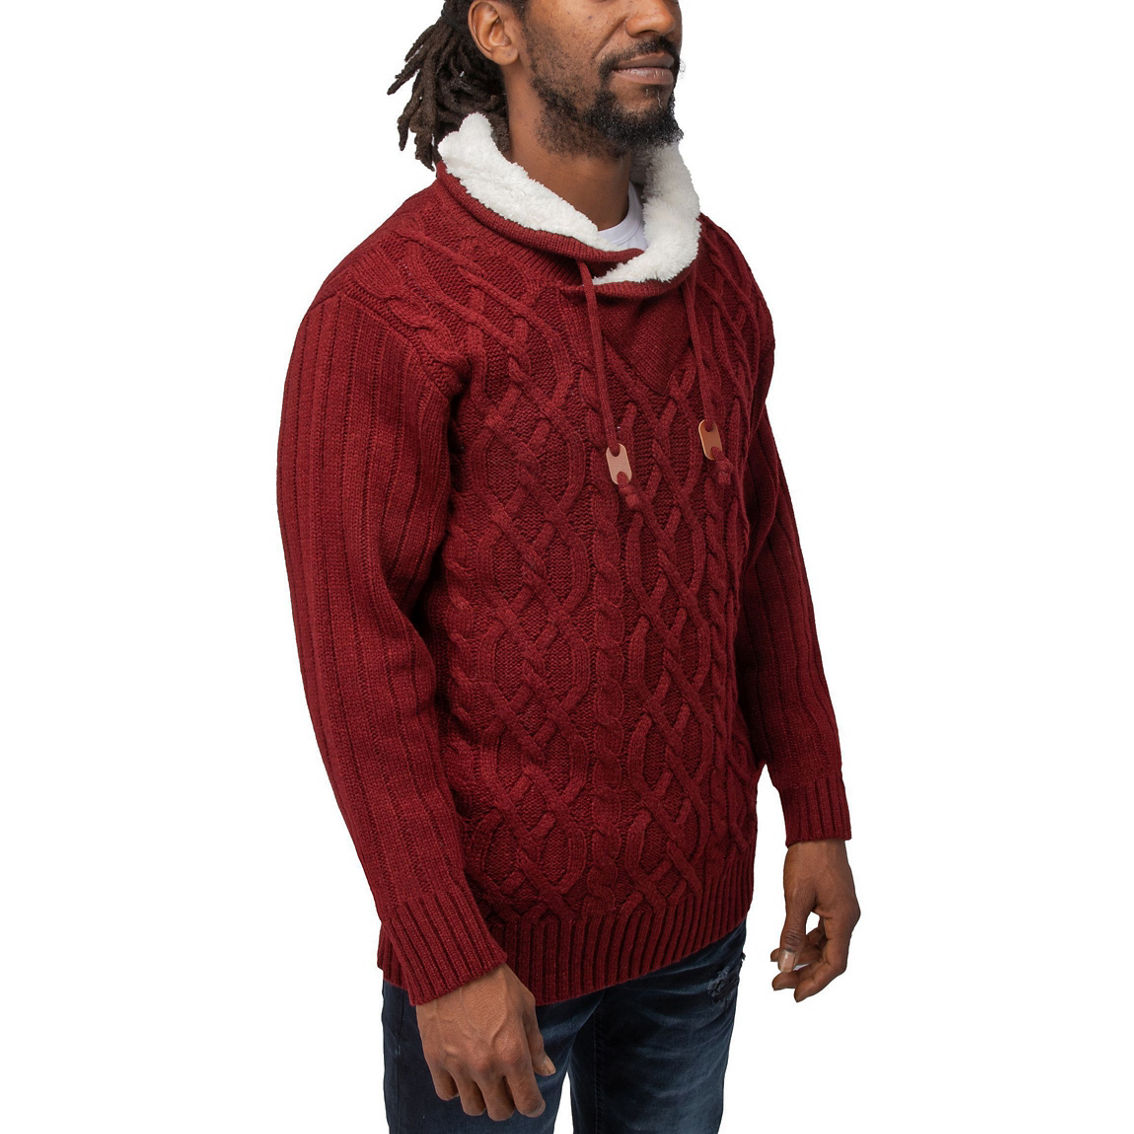 Men's Cable Knit Cowl Neck Sweater - Image 3 of 3